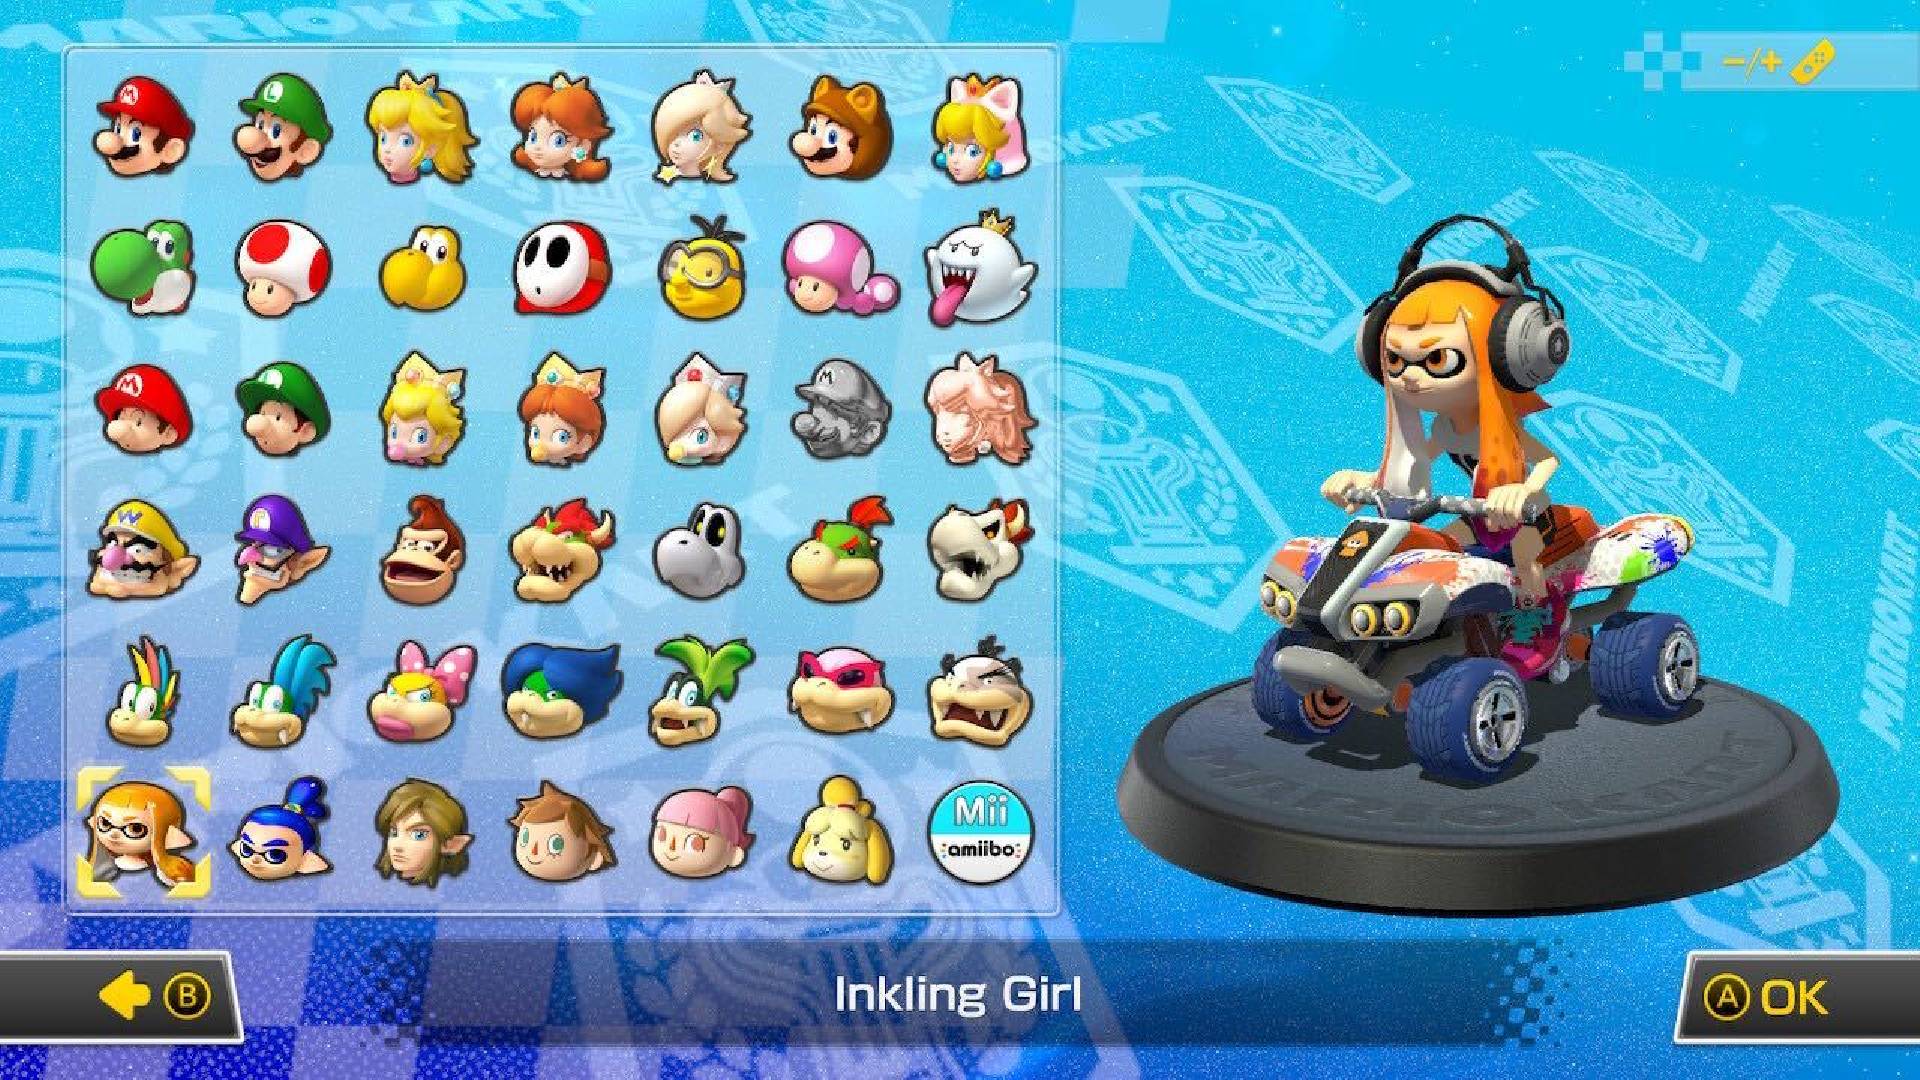 Inkling Girl from Splatoon is visible on a character selection screen, sitting in a kart